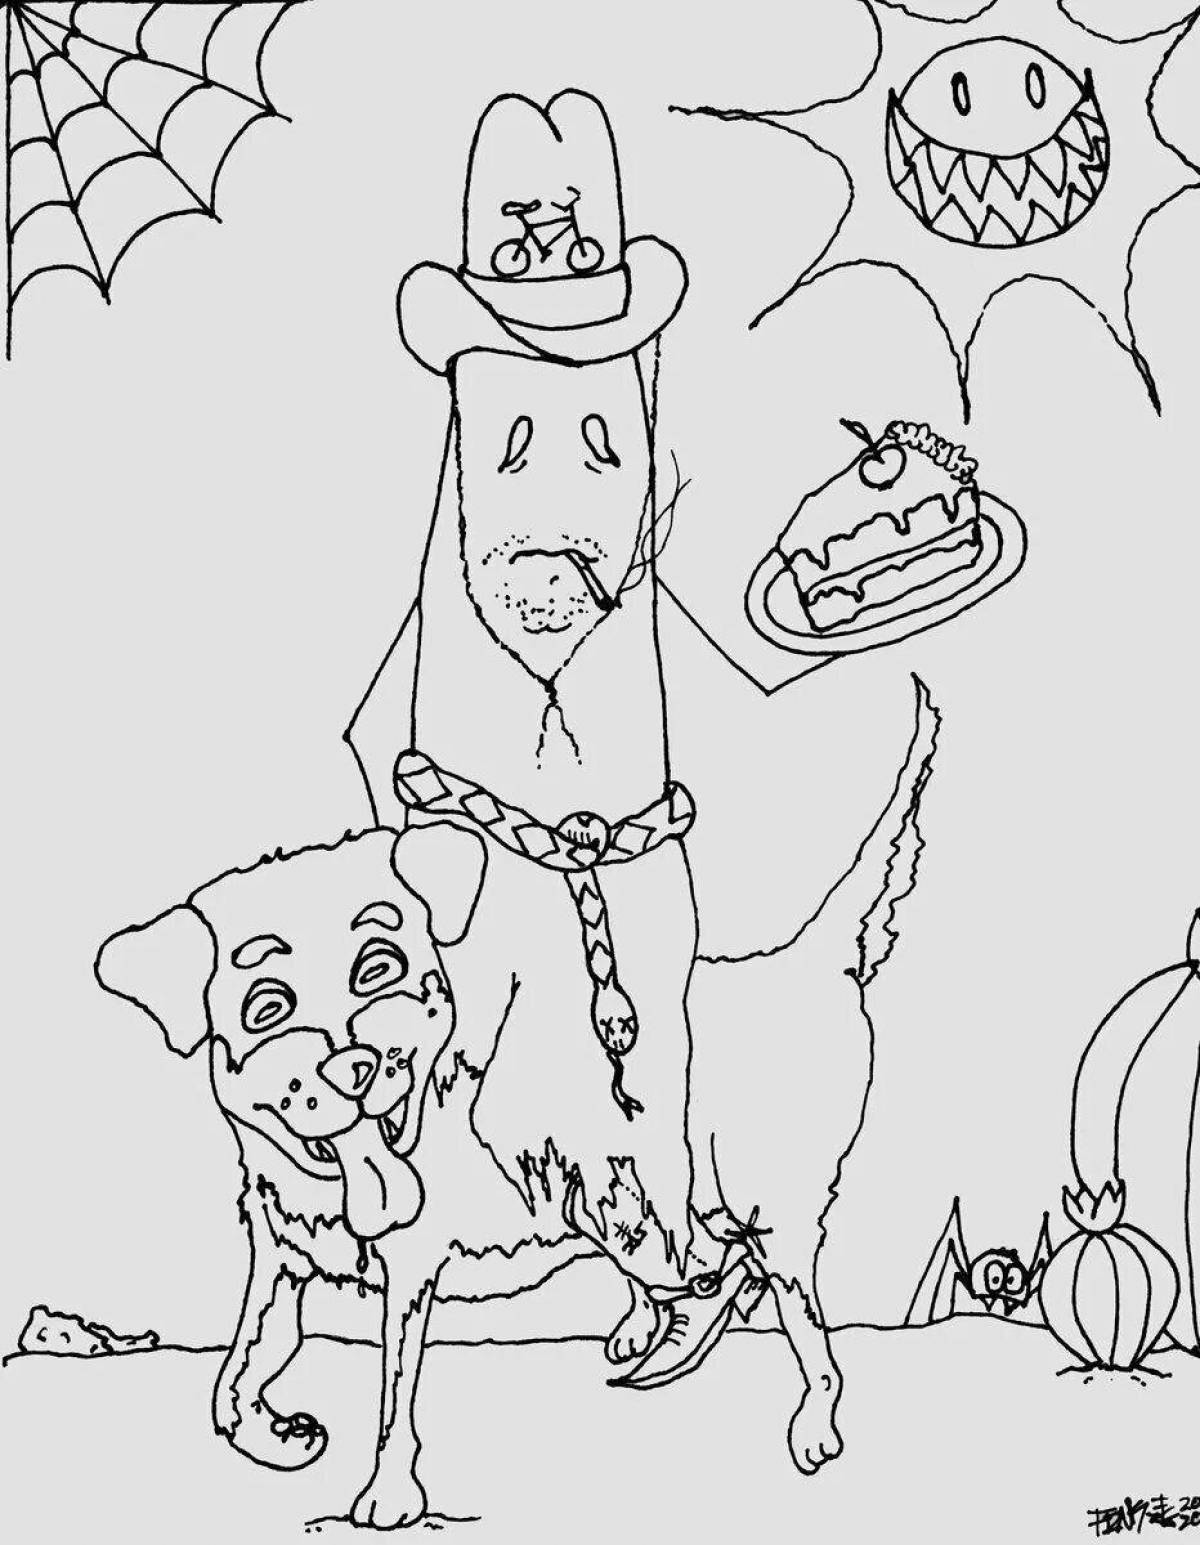 Coloring page festive mr pickles